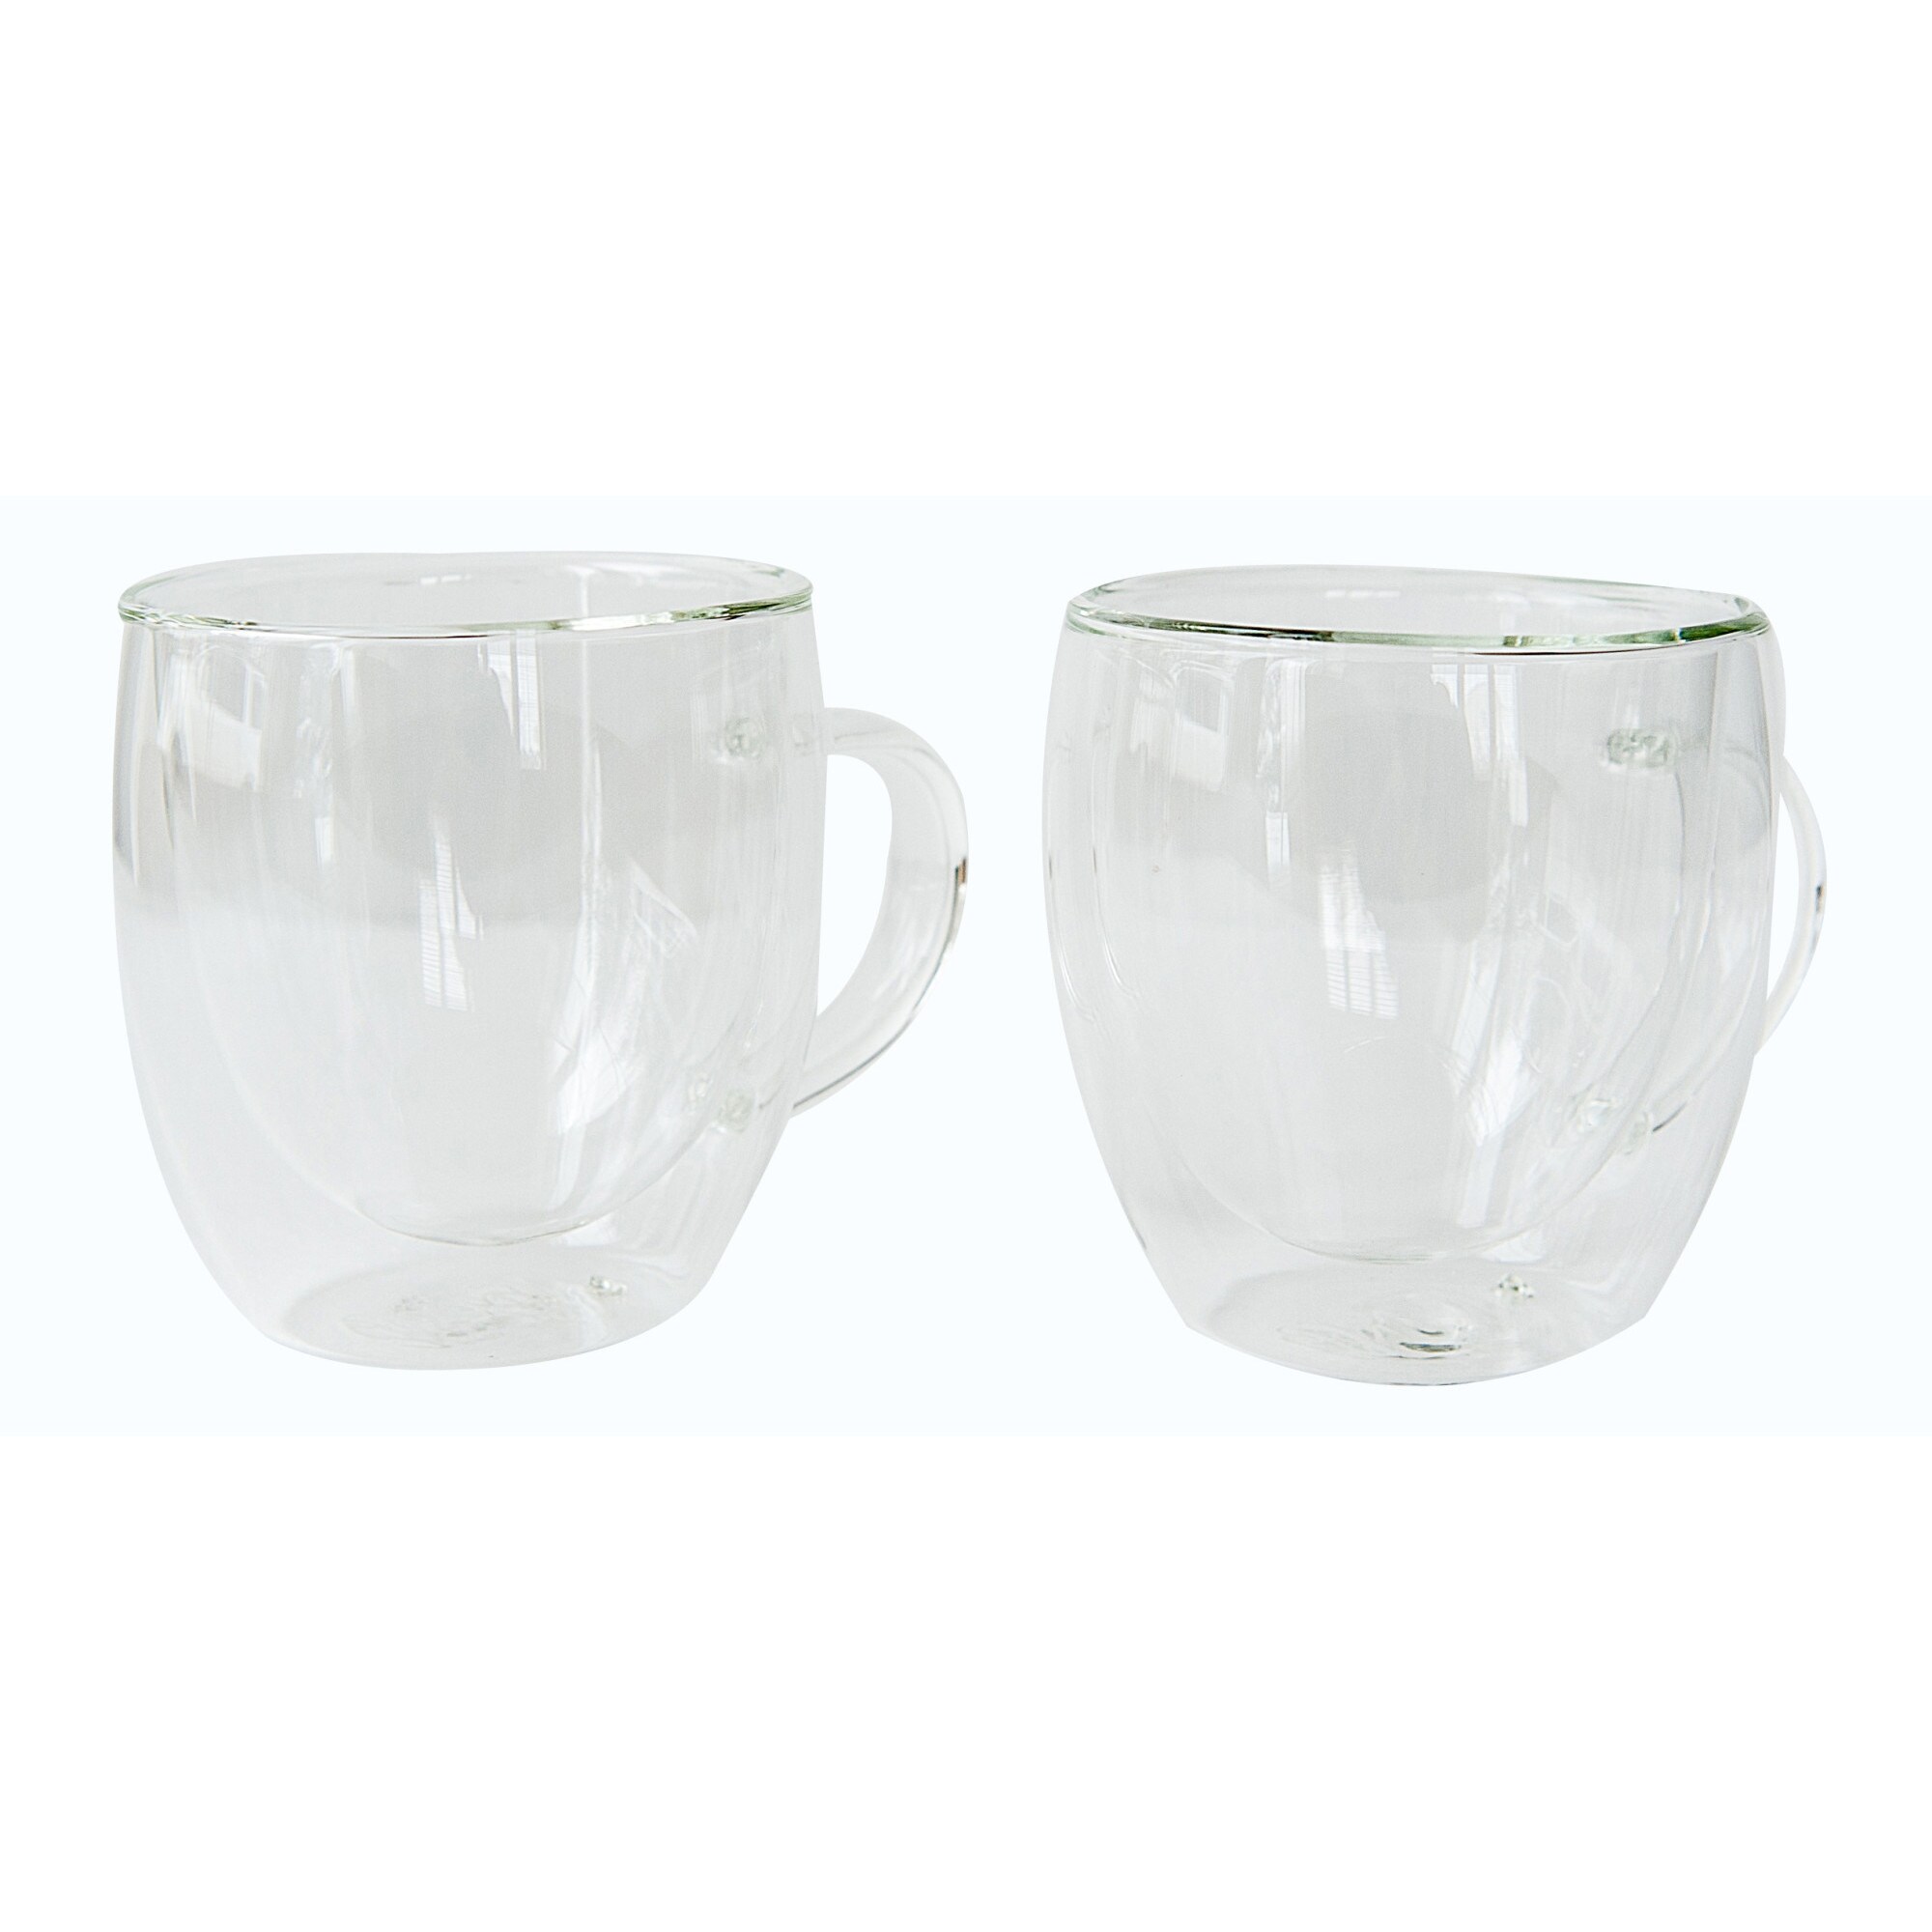 https://ak1.ostkcdn.com/images/products/19745905/Milk-Frother-and-Set-of-12-8oz-Bistro-Mugs-from-JavaFly-Double-Walled-Glasses-de8ad1f7-5b12-48ae-aea9-138575515bf1.jpg